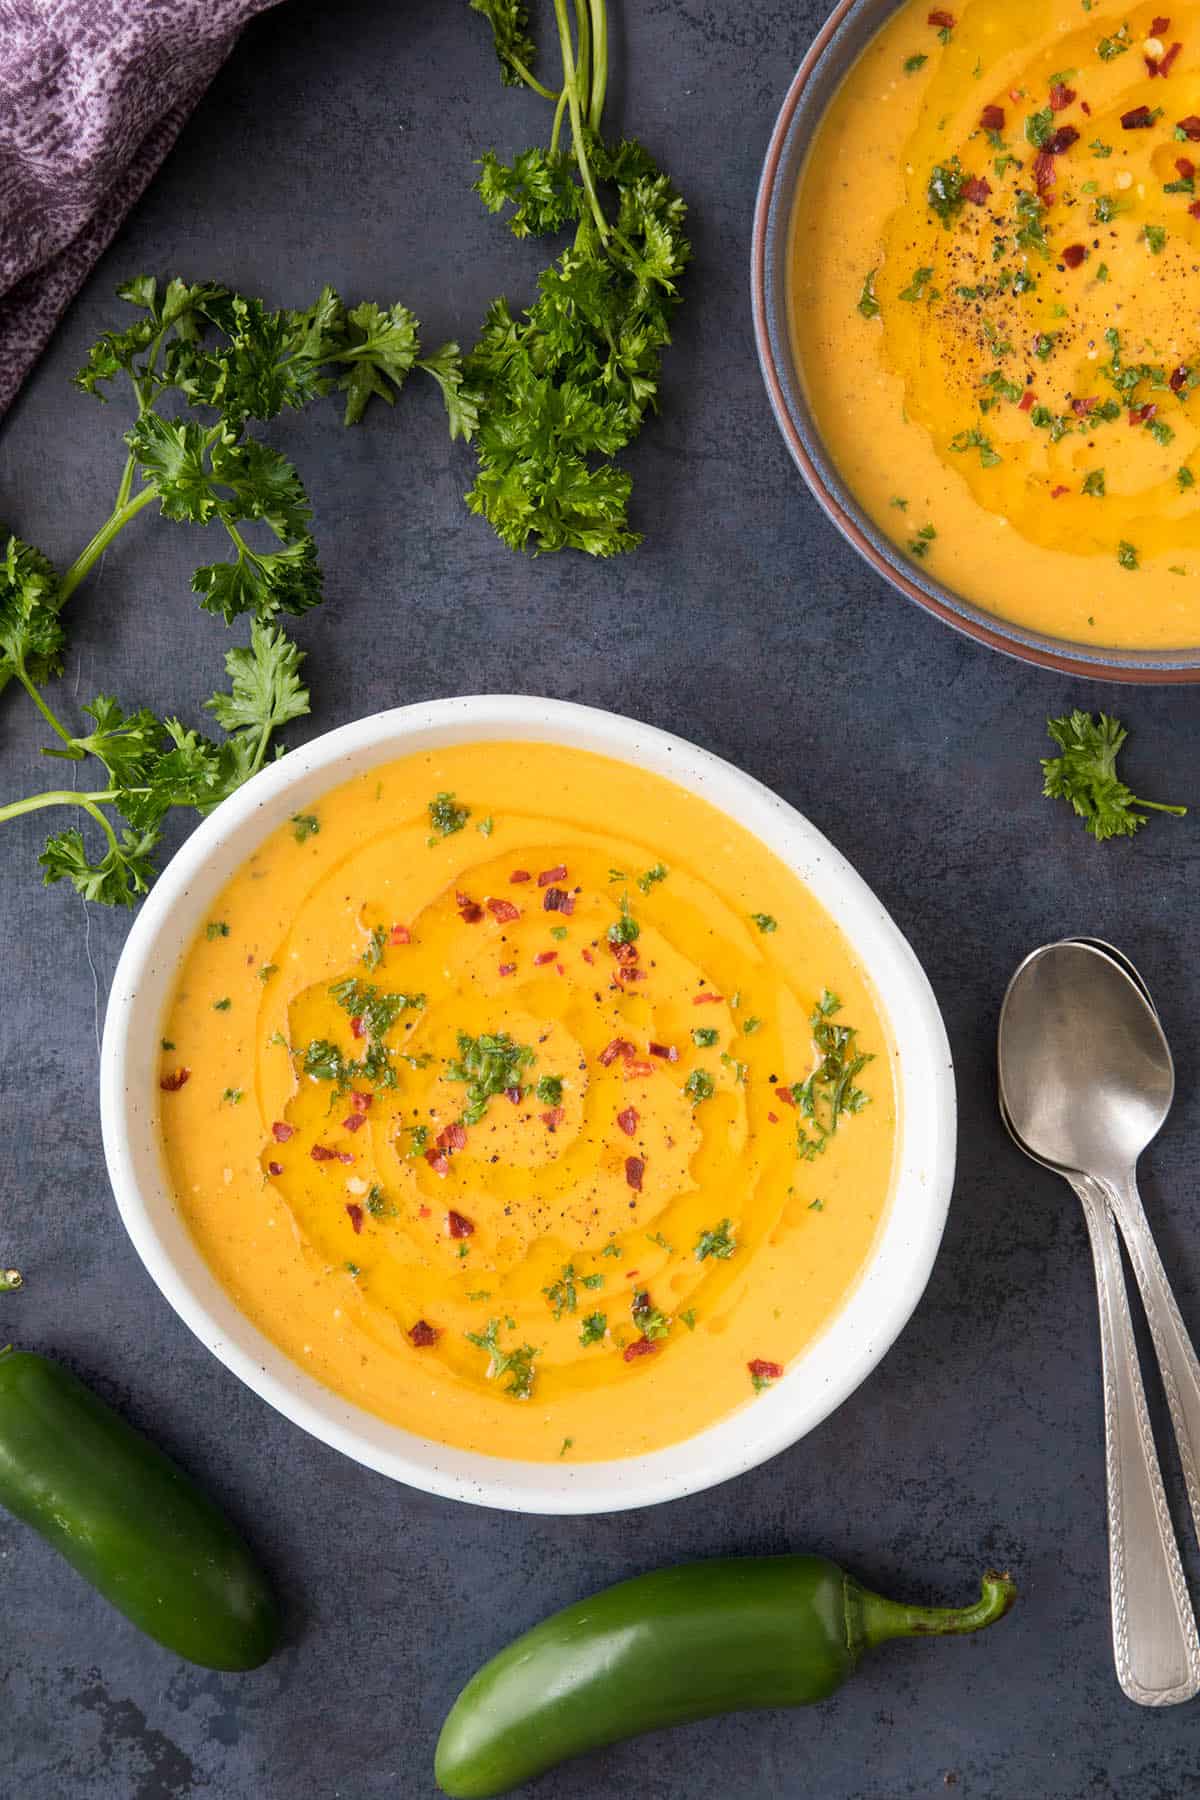 30-Minute Sweet Potato Soup - Recipe with a Bit of Extra Spiciness